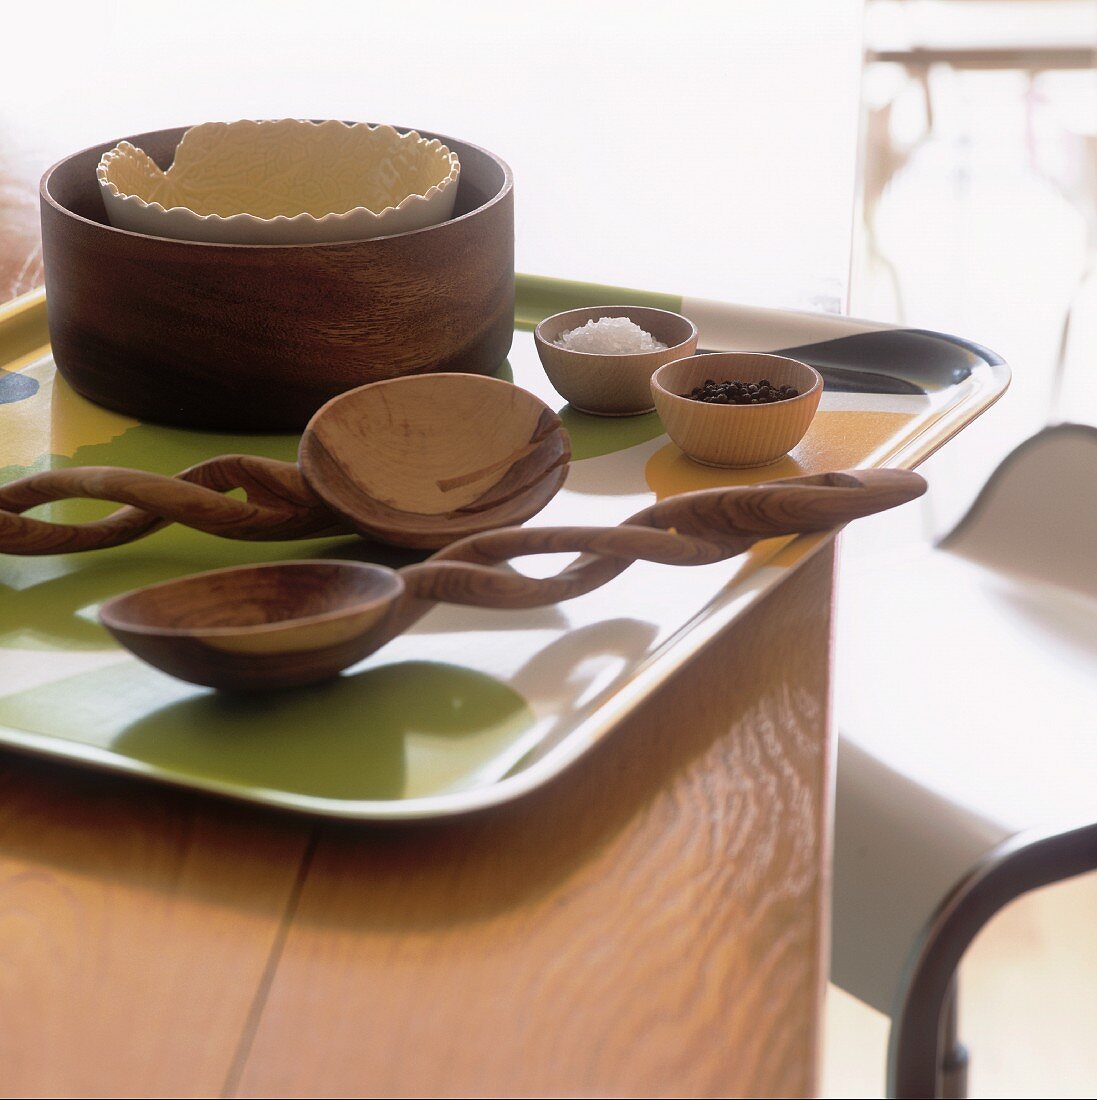 Wooden spoons and bowls on a tray